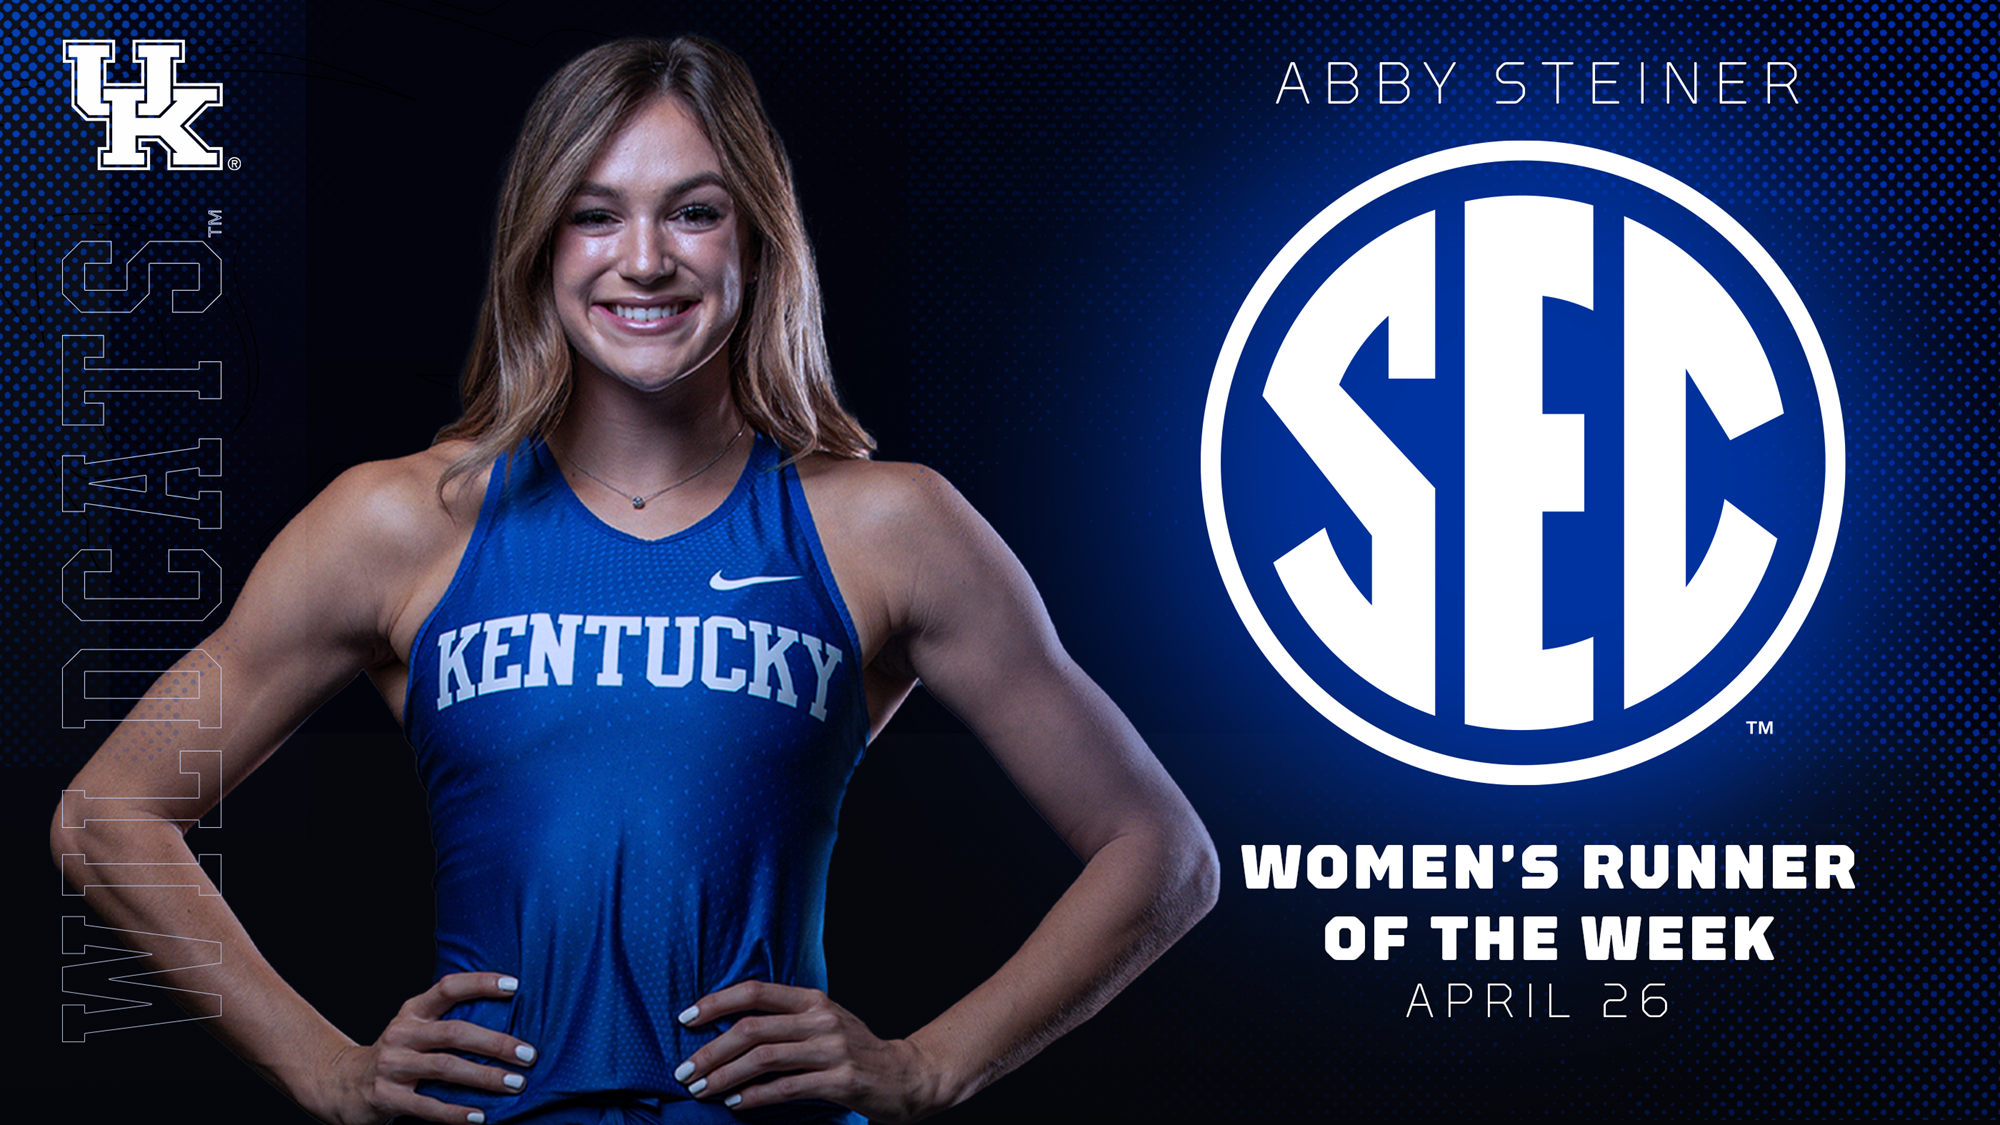 Abby Steiner Wins Fifth National and Fourth SEC Runner of the Week Honor of Season